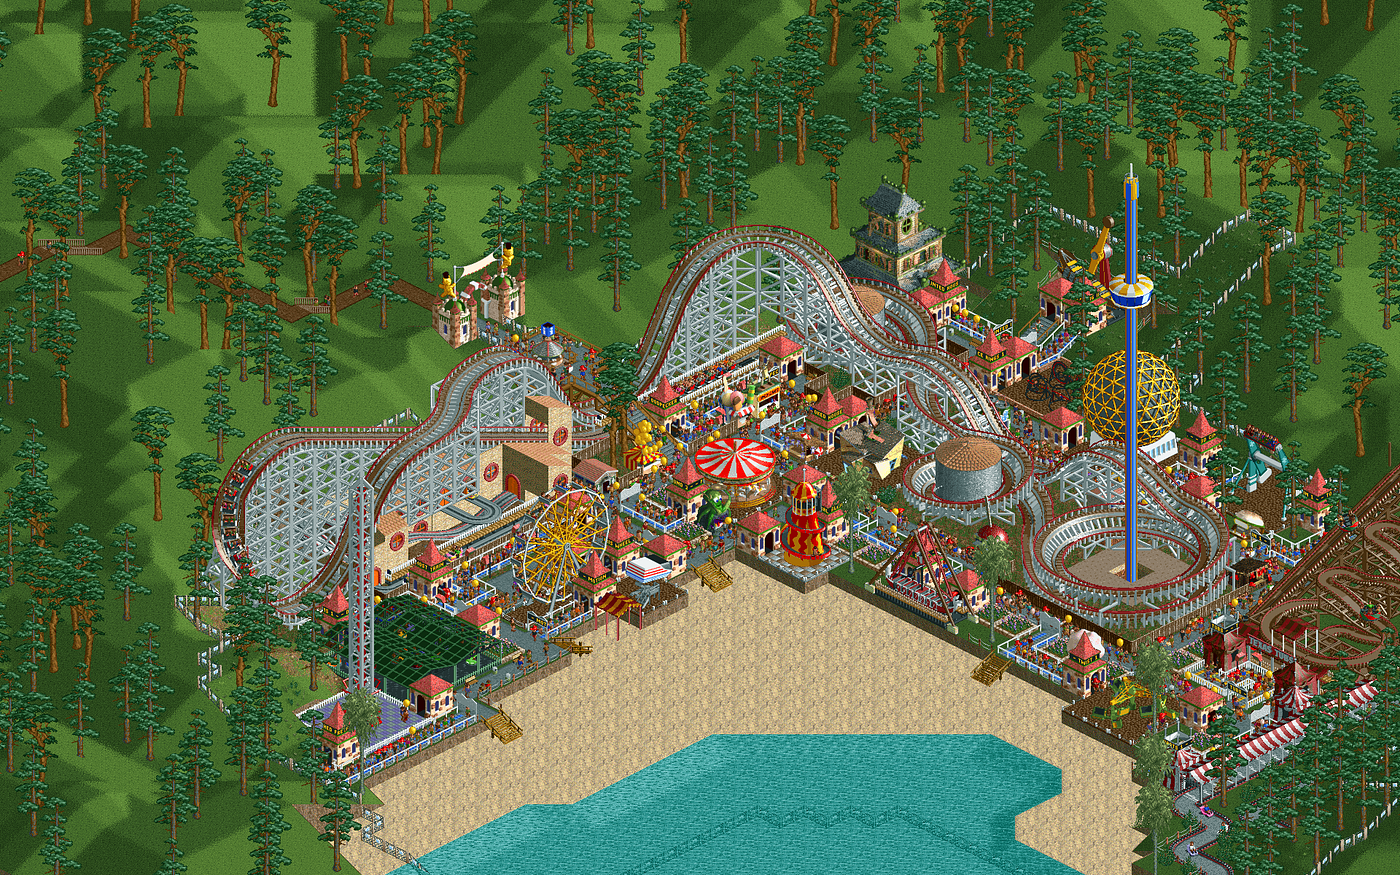 RollerCoaster Tycoon 3: Soaked! Review - GameSpot